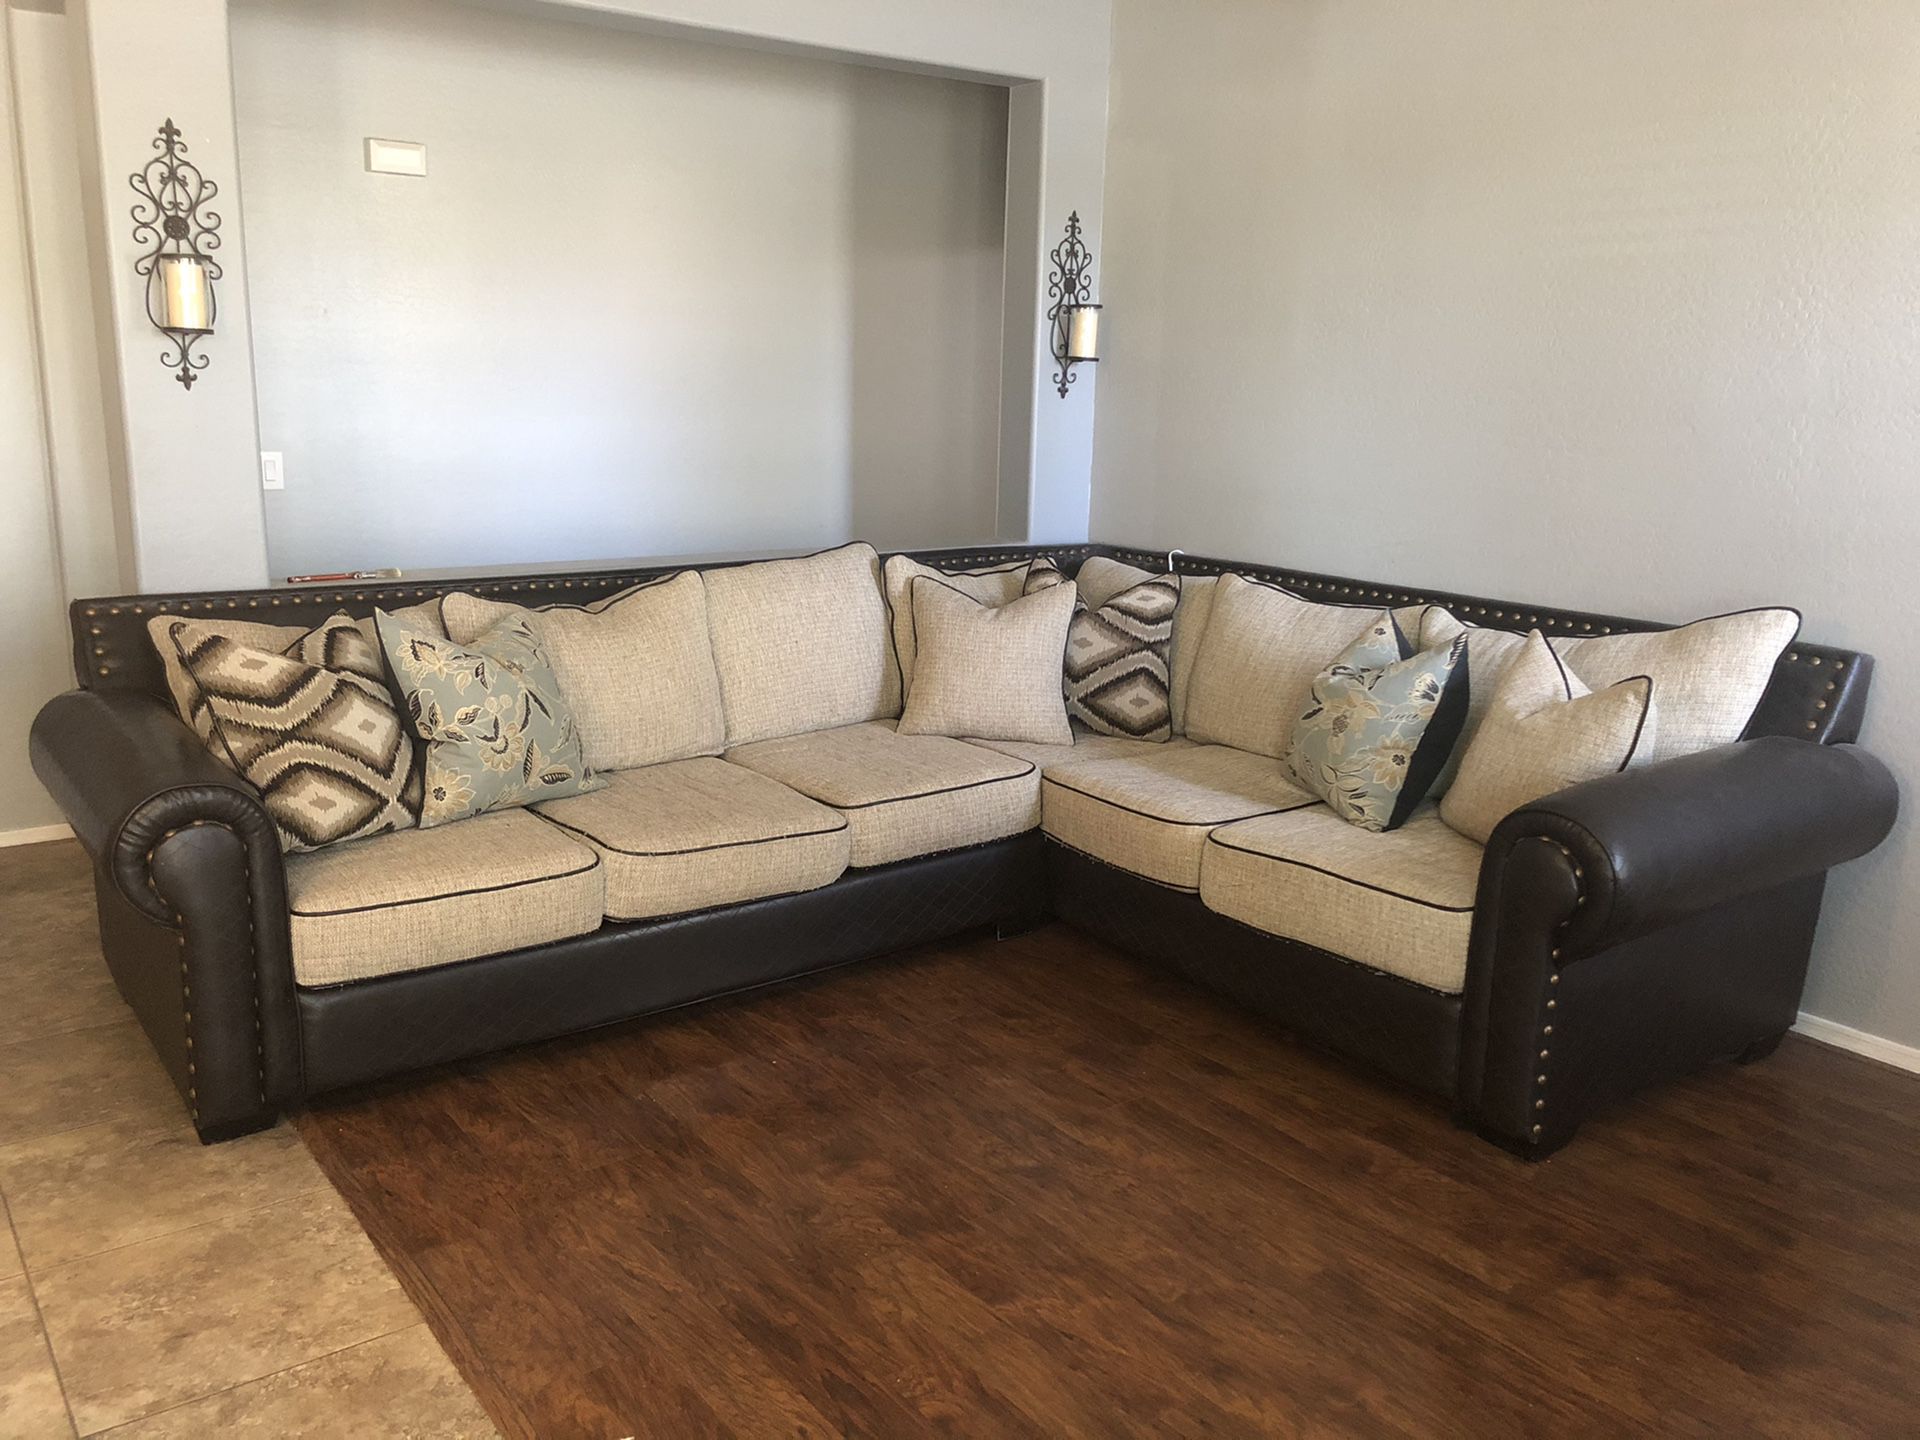 FREE sectional couch